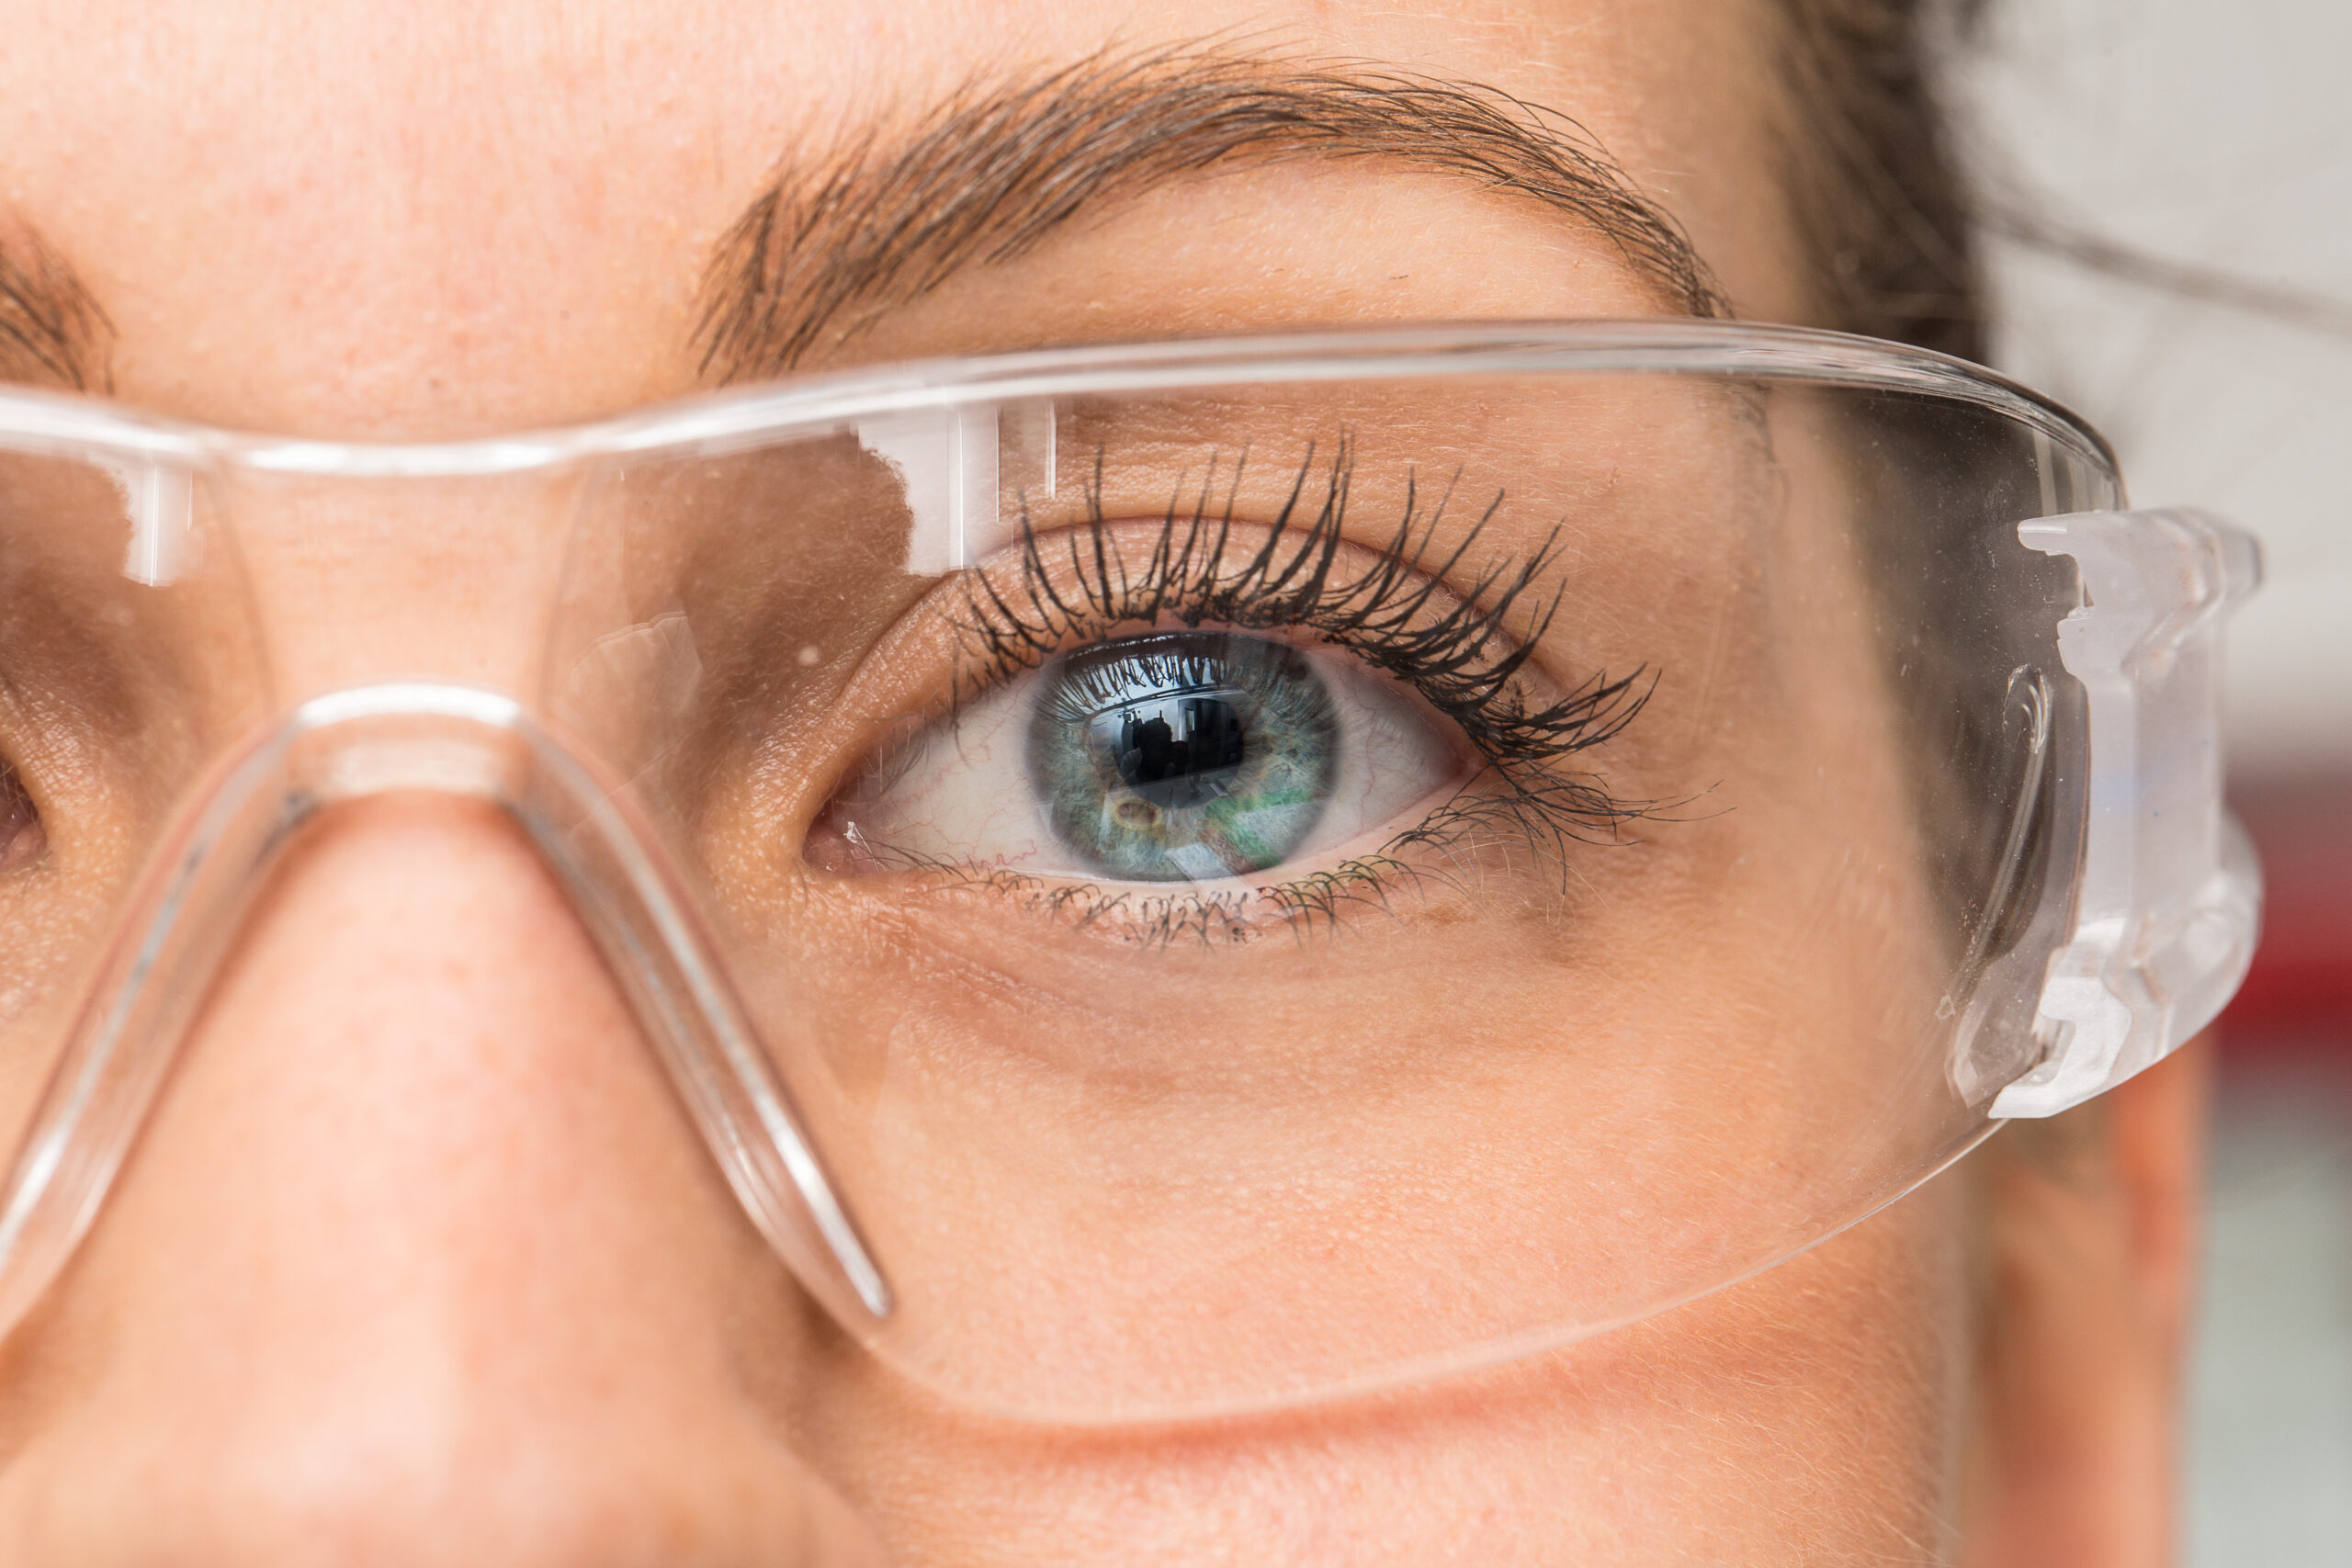 Safety First! The Importance of Safety Glasses in the Workplace